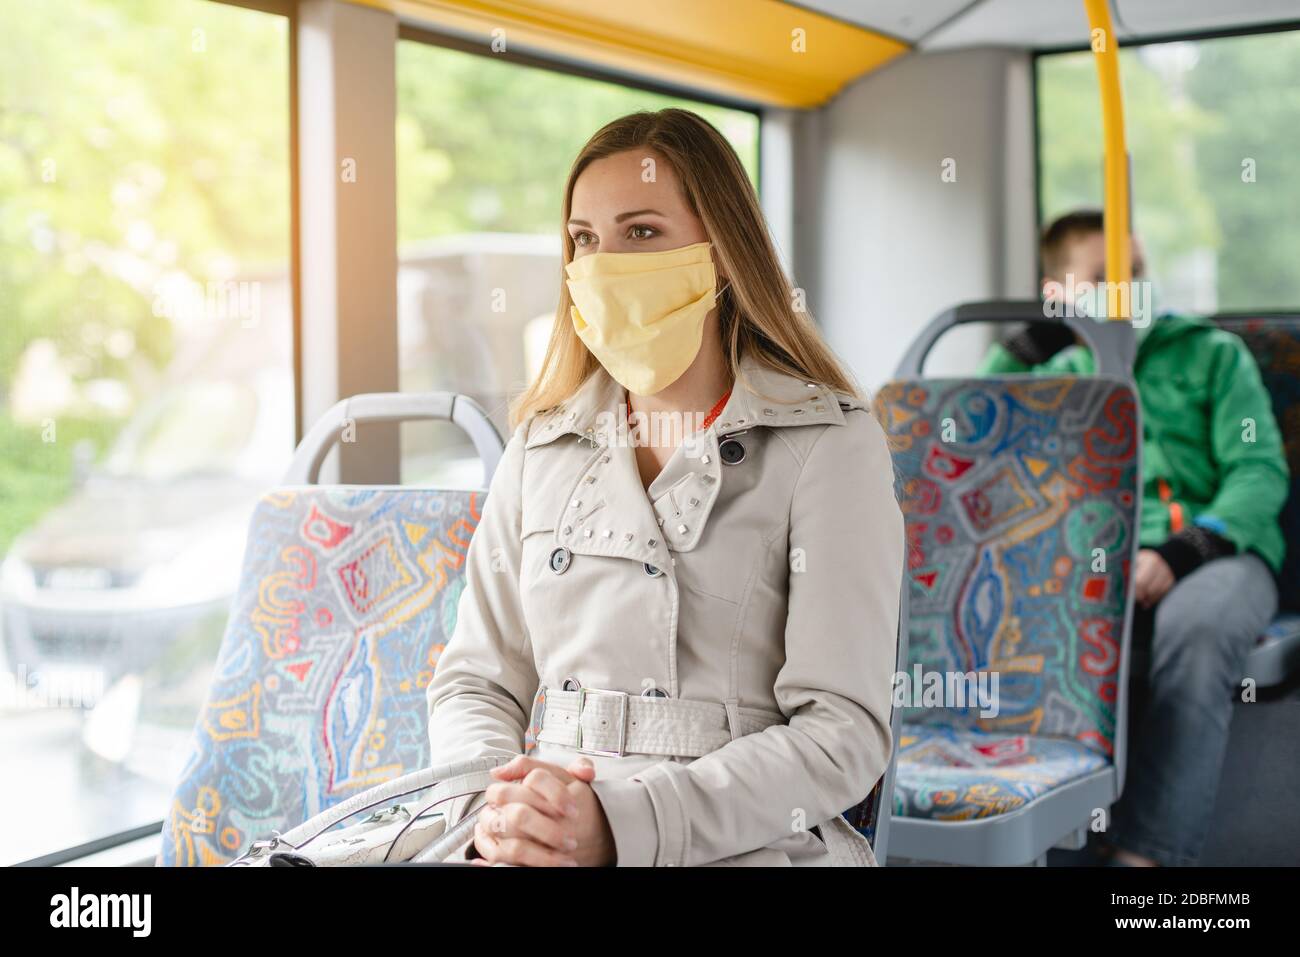 Woman using public transport during covid-19 crisis wearing face mask Stock Photo